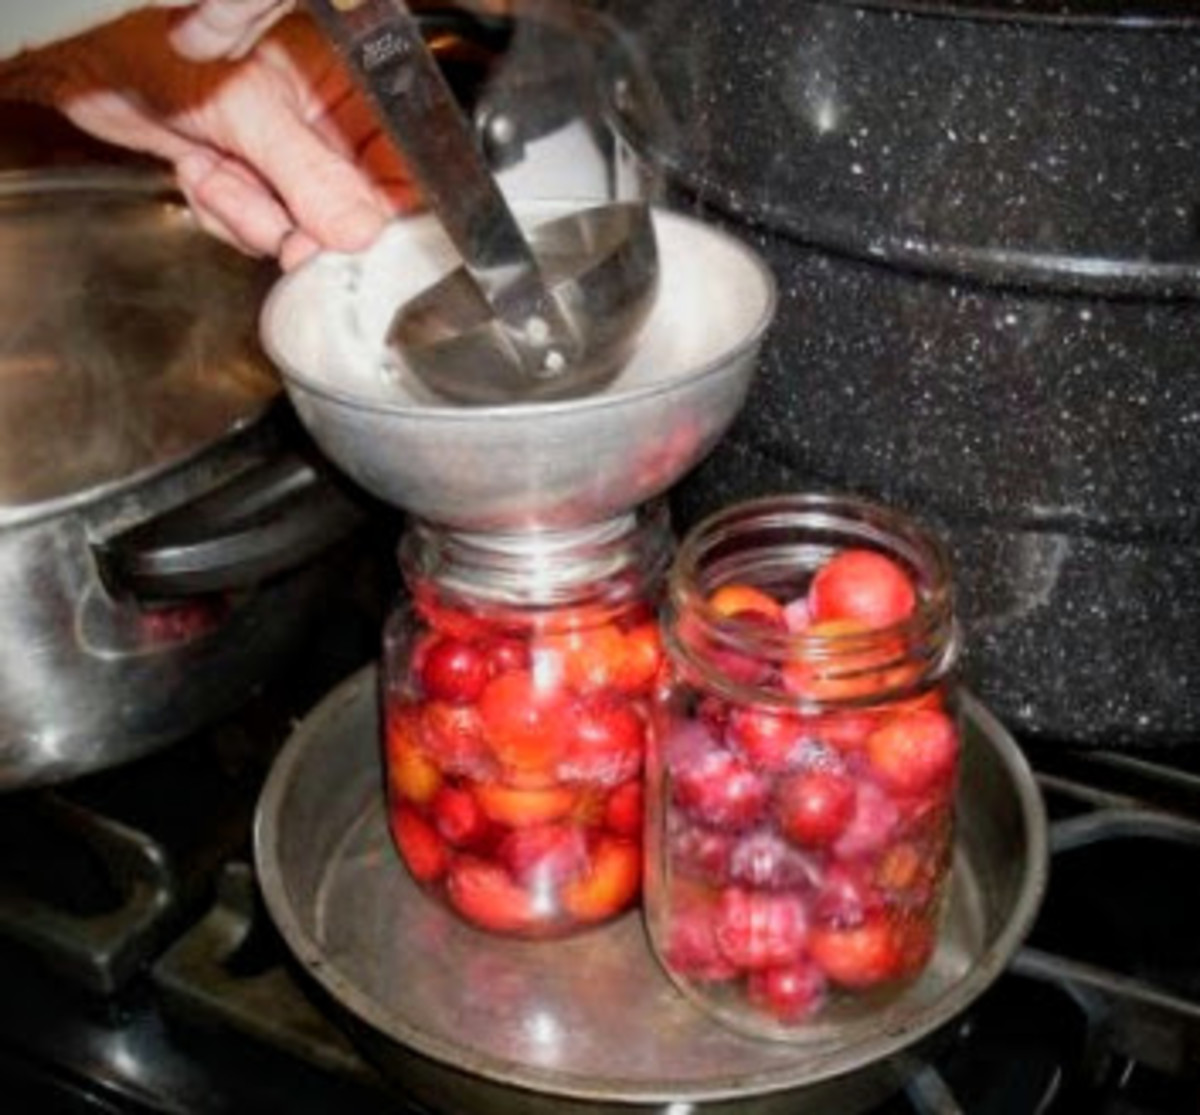 Using a canning funnel, if desired, ladle hot syrup into hot jars, leaving 1/2" headspace.